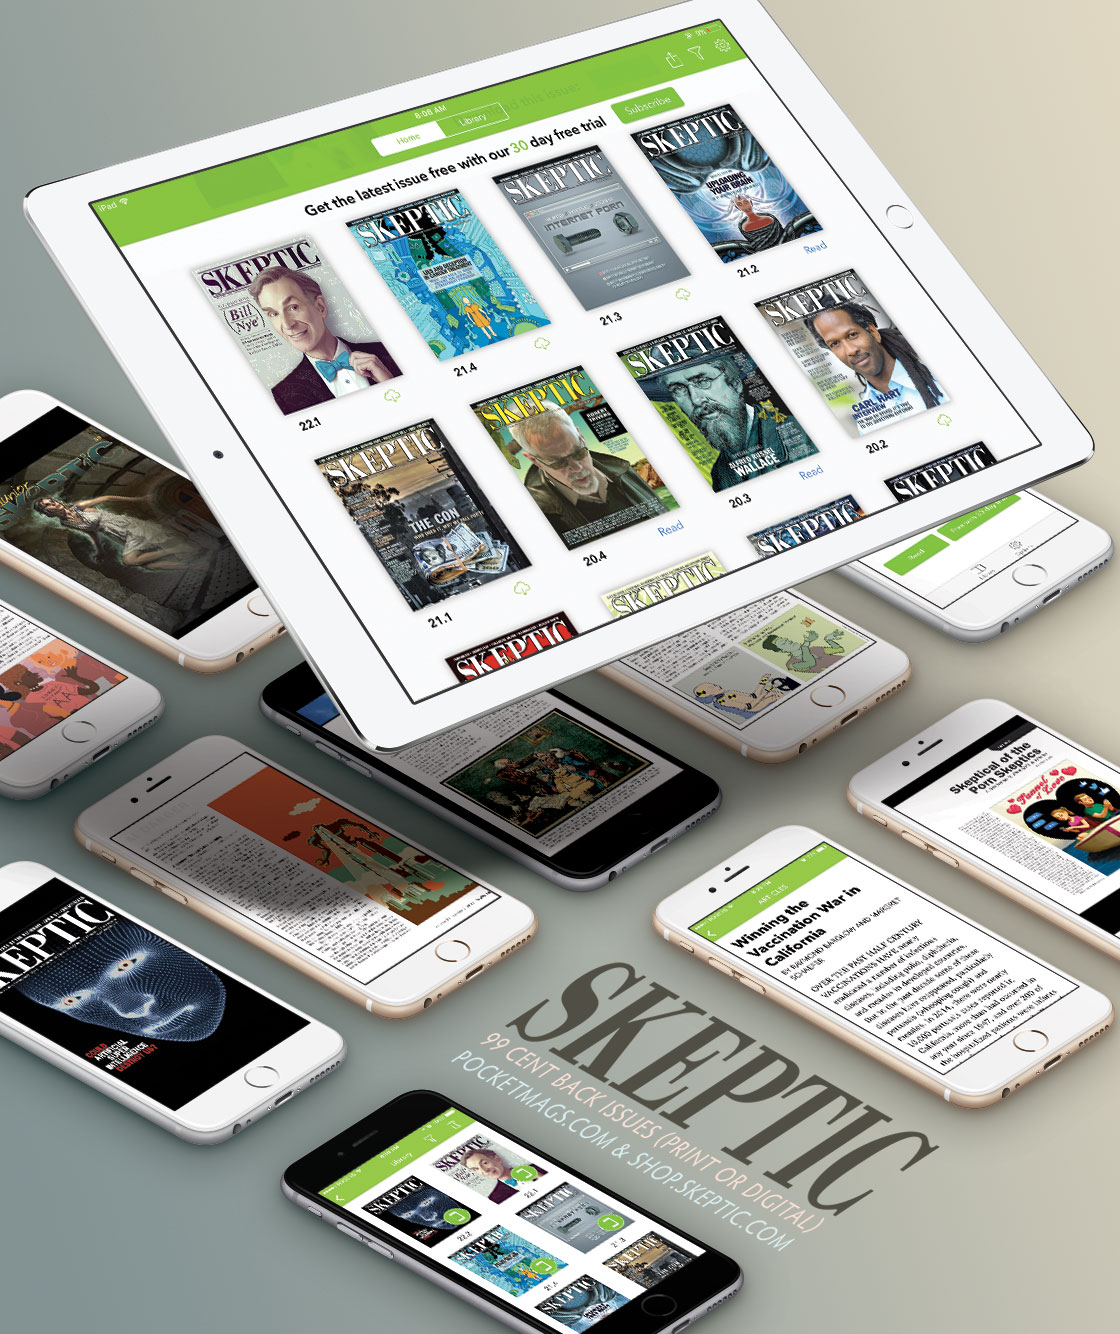 Complete your Skeptic Magazine Collection. Back Issues on sale for 99 cents each (in print and digital formats)